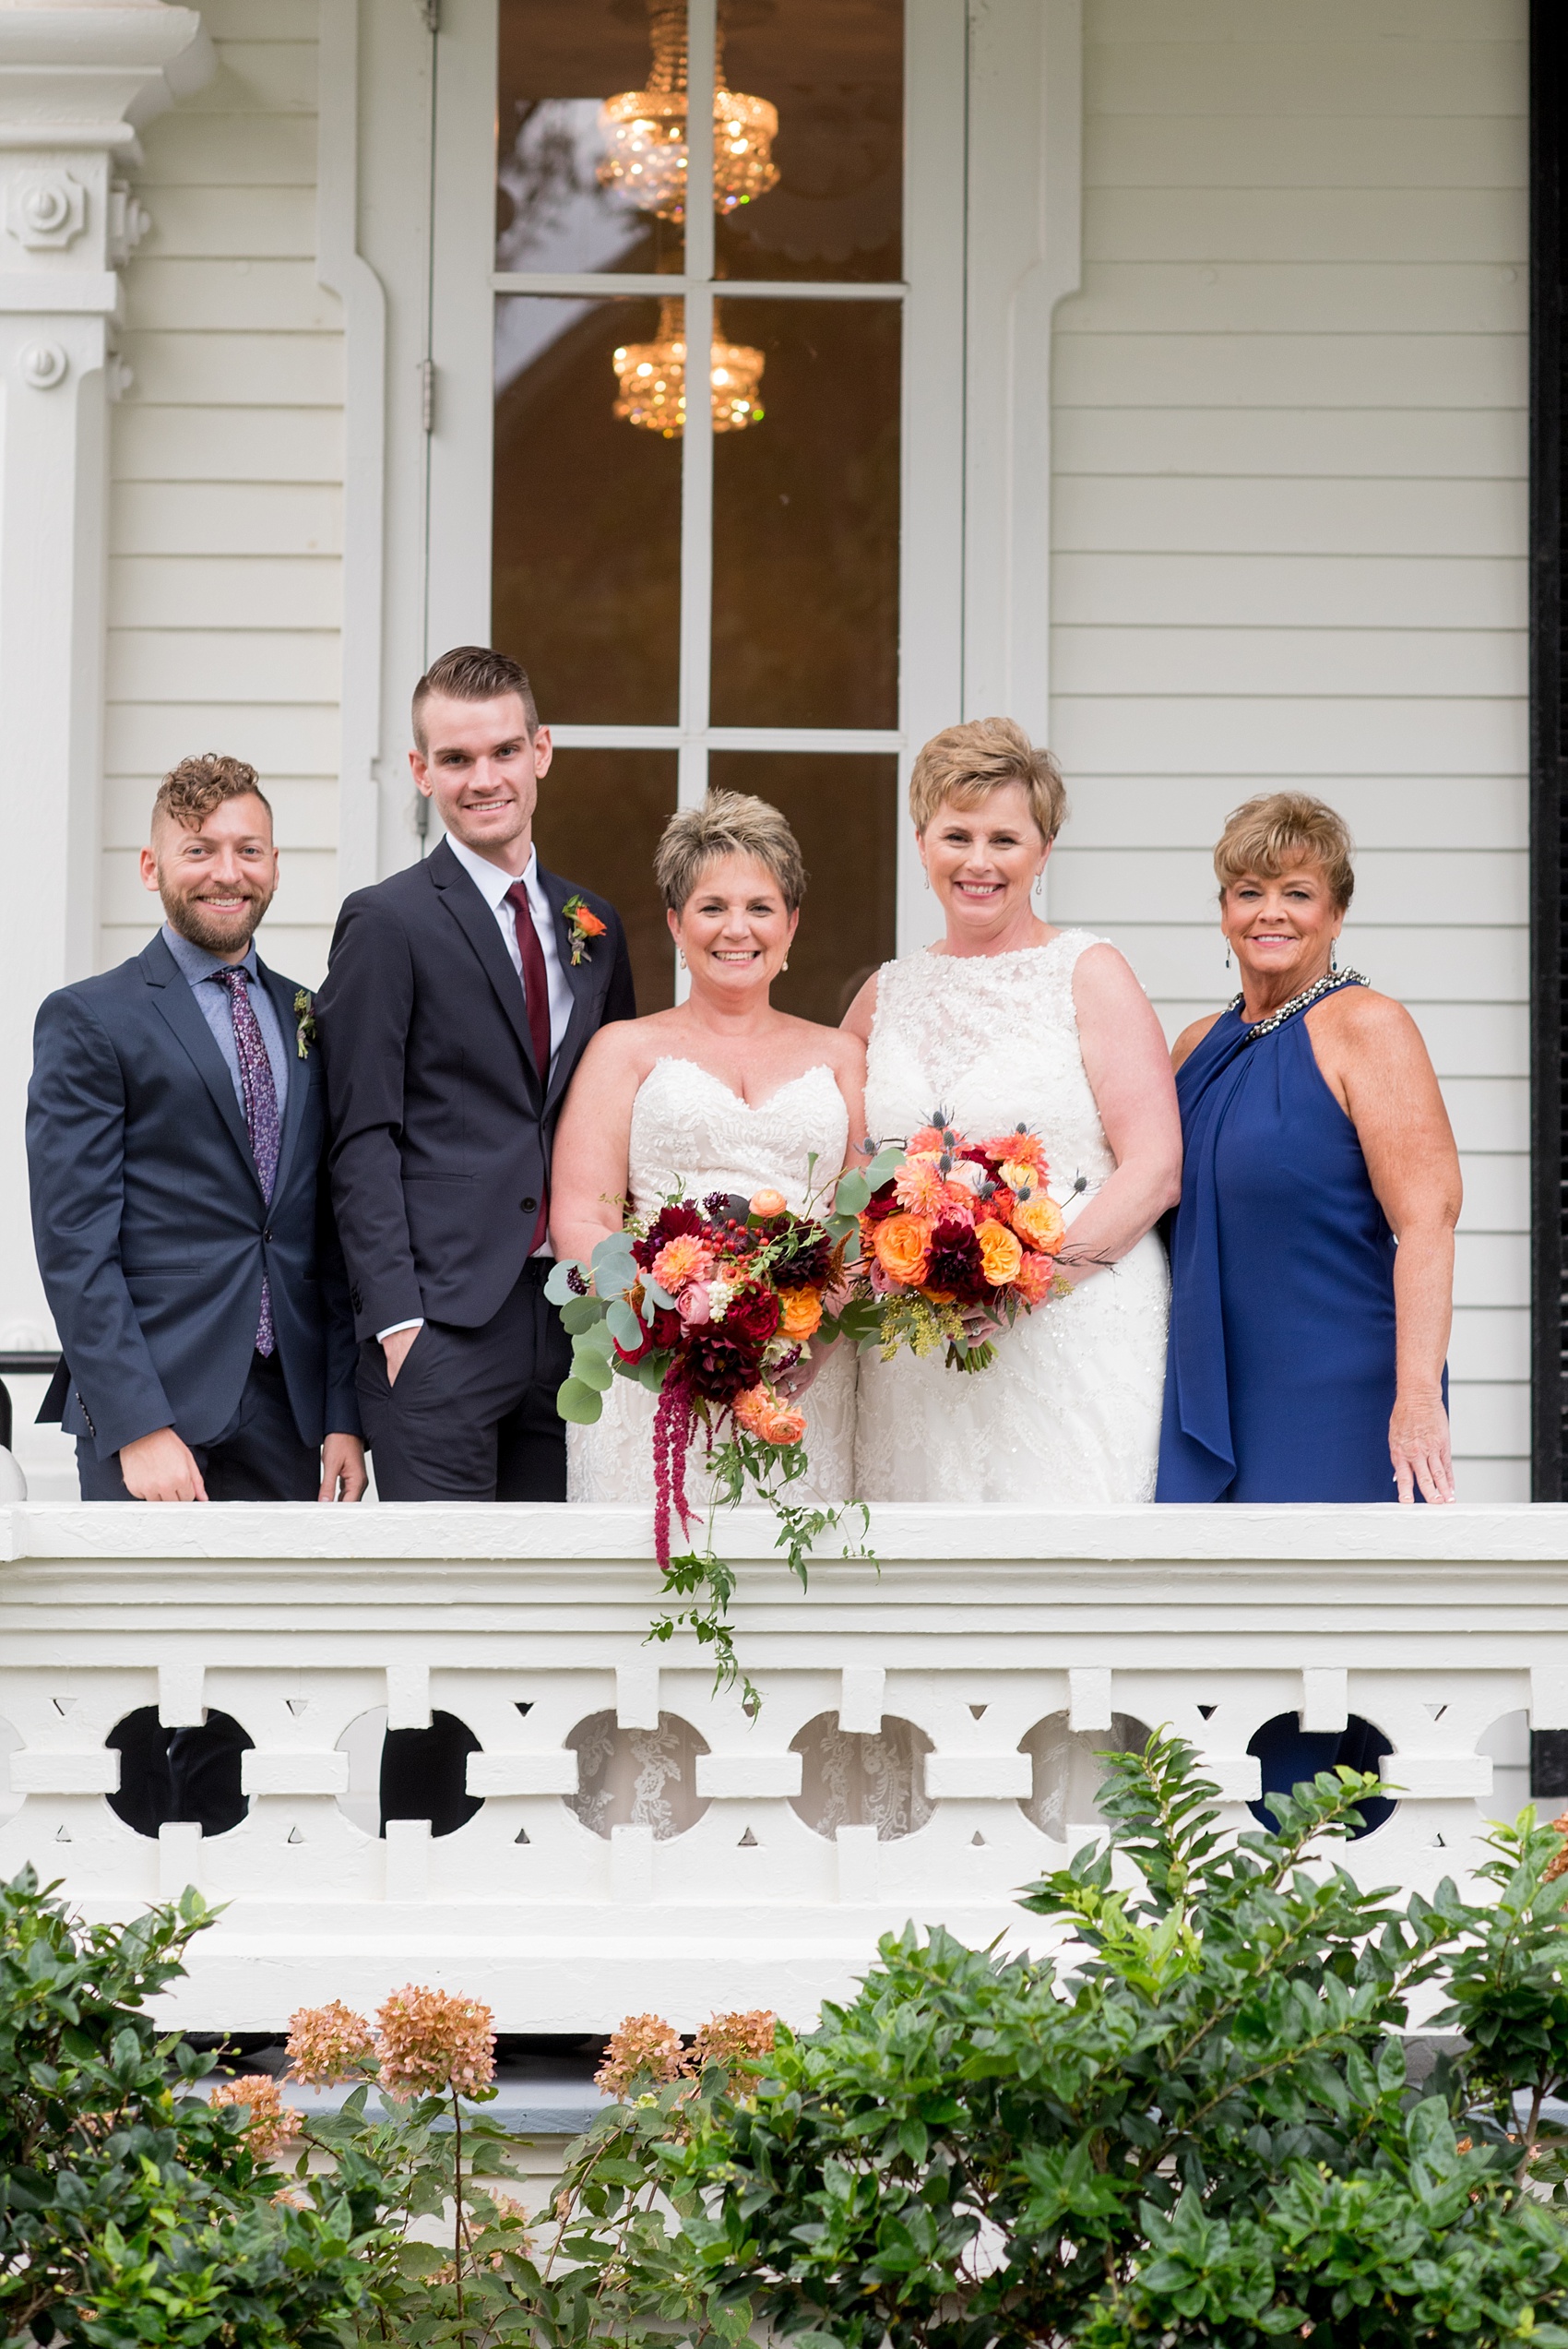 Mikkel Paige Photography photos from a Merrimon-Wynne House wedding in Raleigh. Two brides tie the knot during their same-sex fall wedding with their best friends by their side.